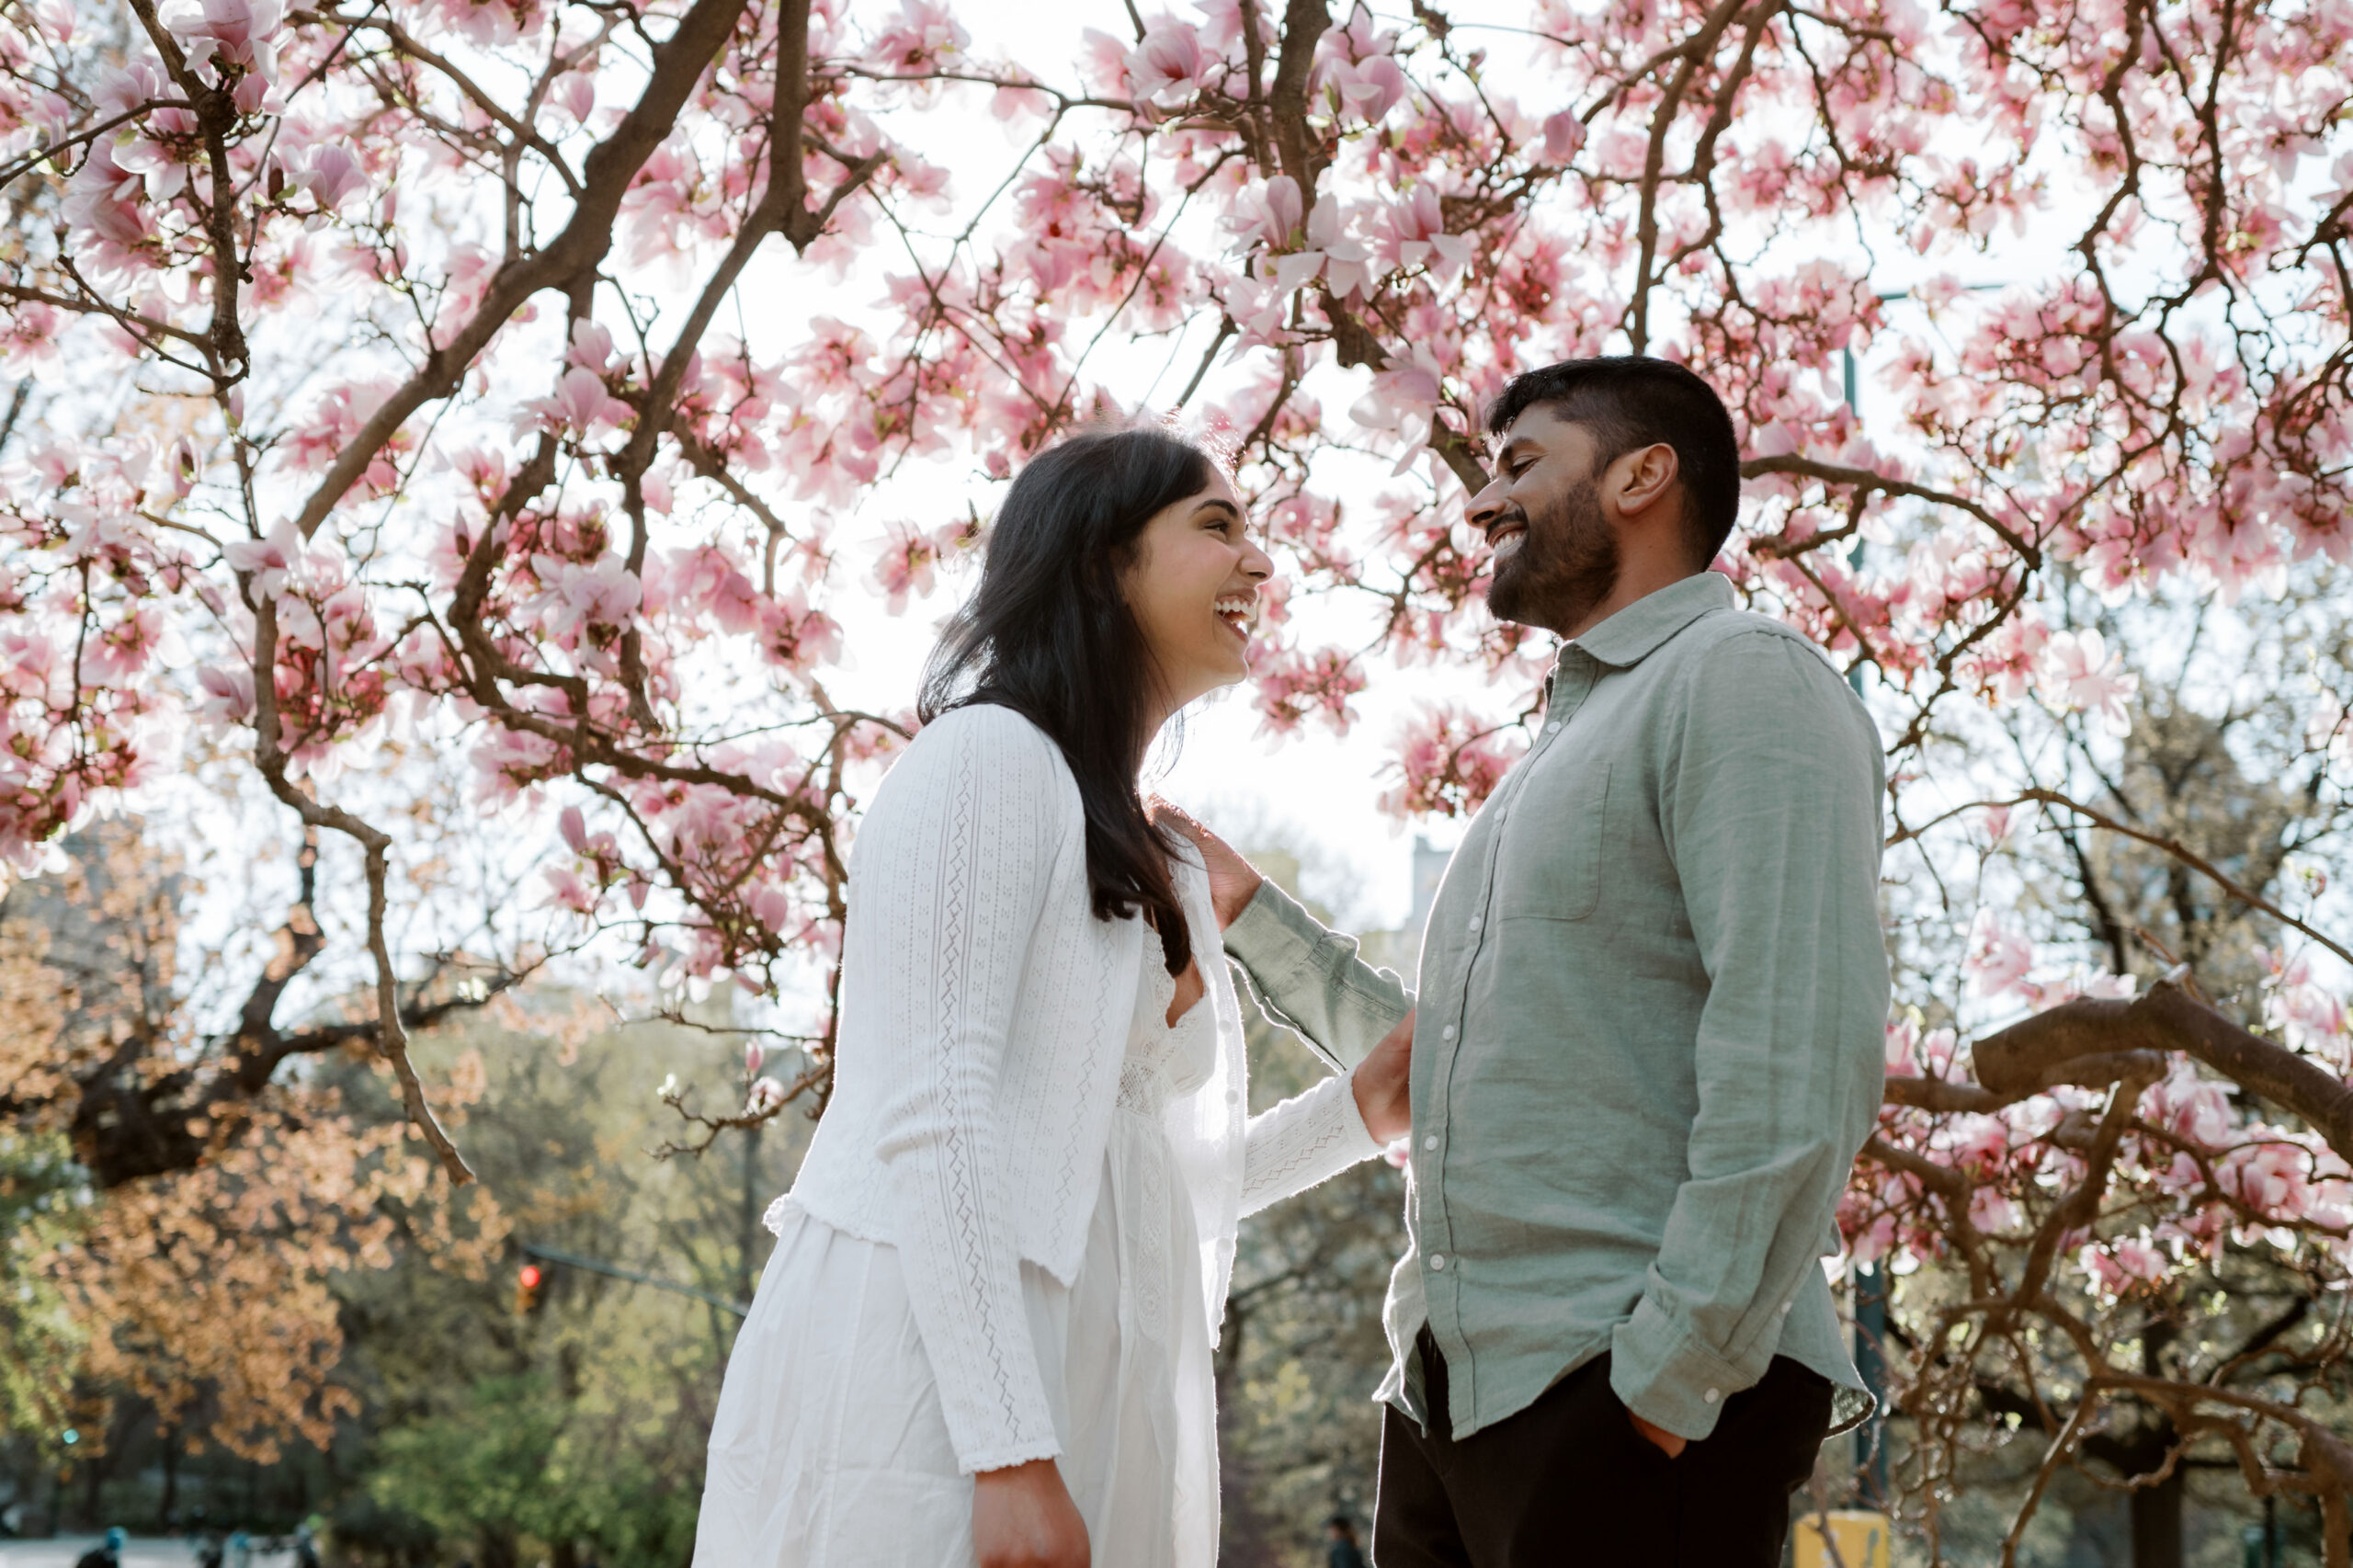 The engaged couple is happily looking at each other with cherry blossoms in the background. Engagement sessions image by Jenny Fu Studio 